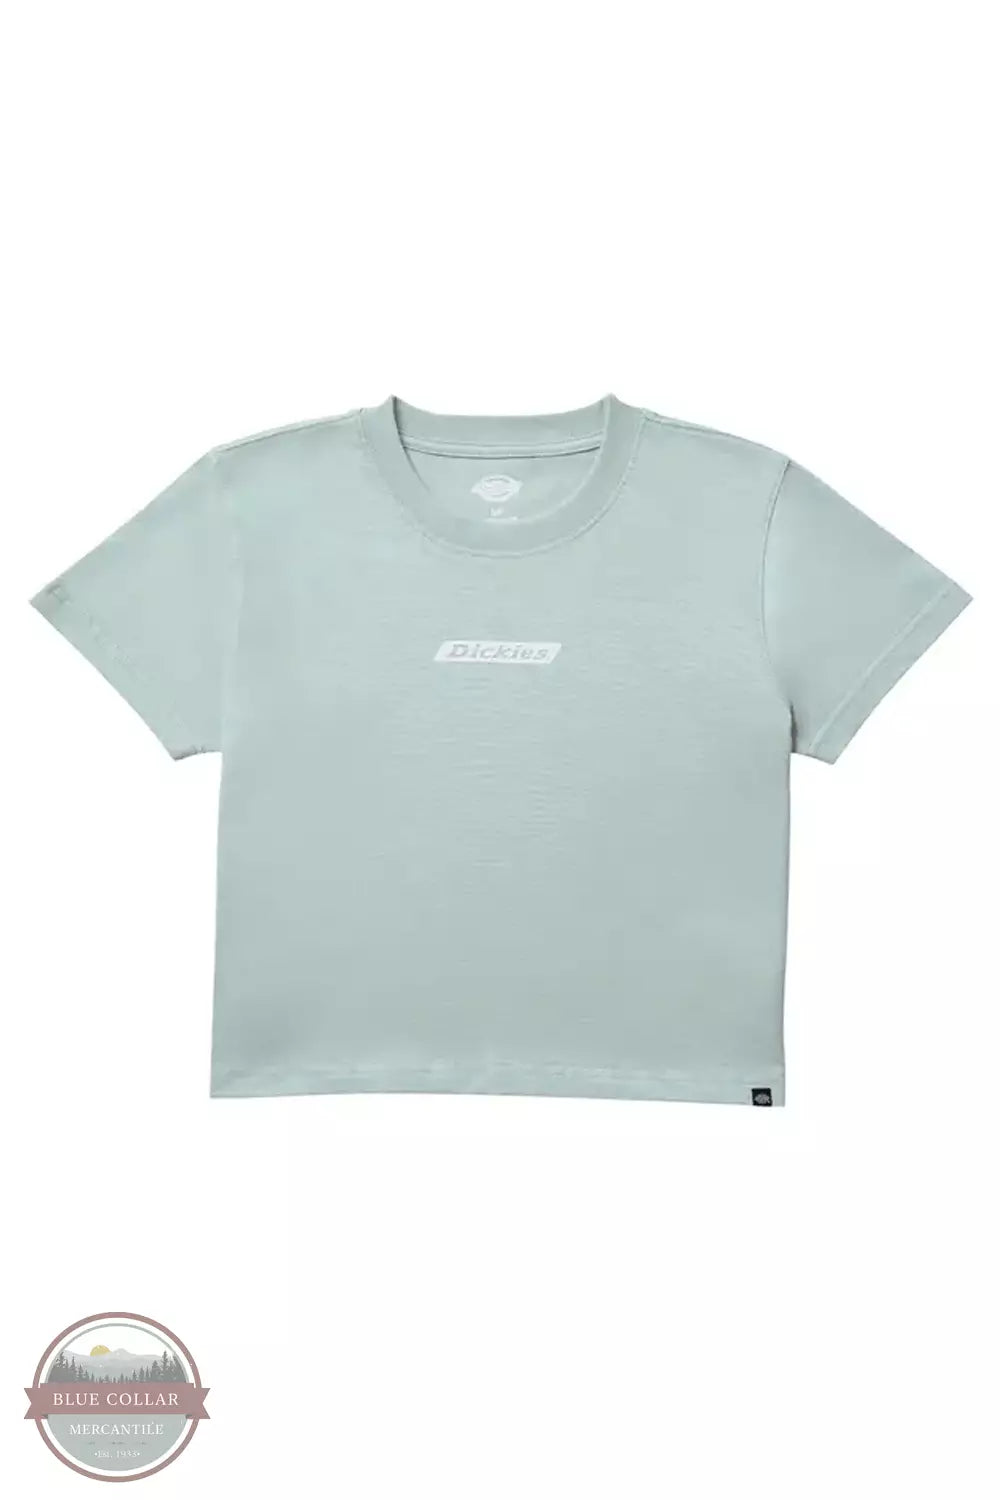 Dickies FS303SP1 Box T-Shirt in Surf Spray Front View